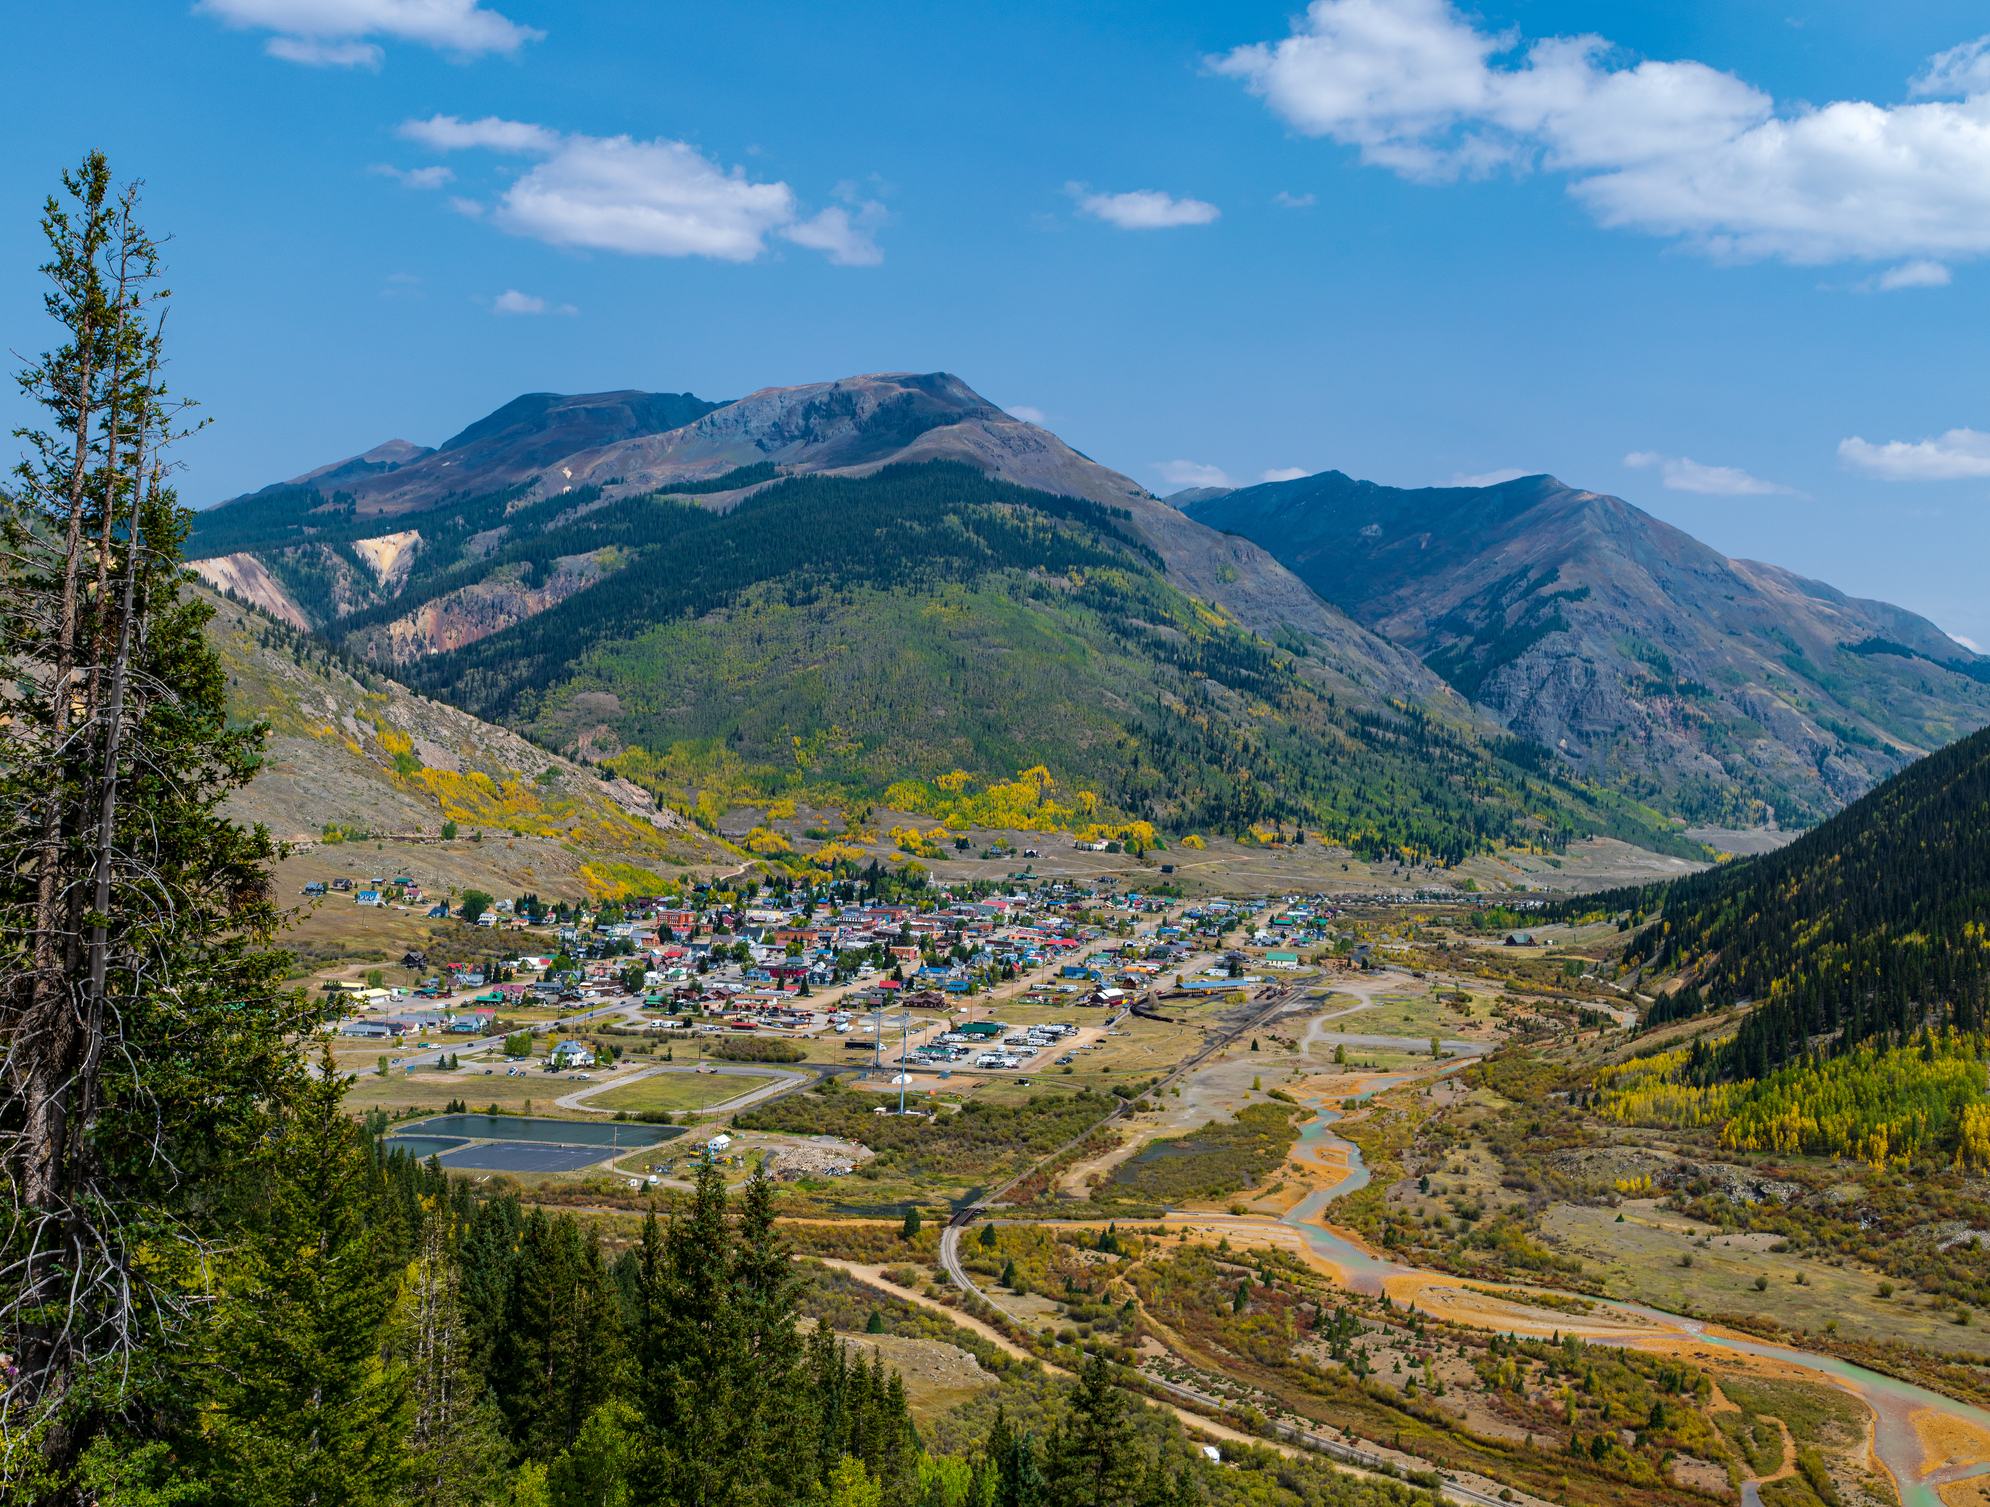 View of small town from high elevation amid high mountain peaks.